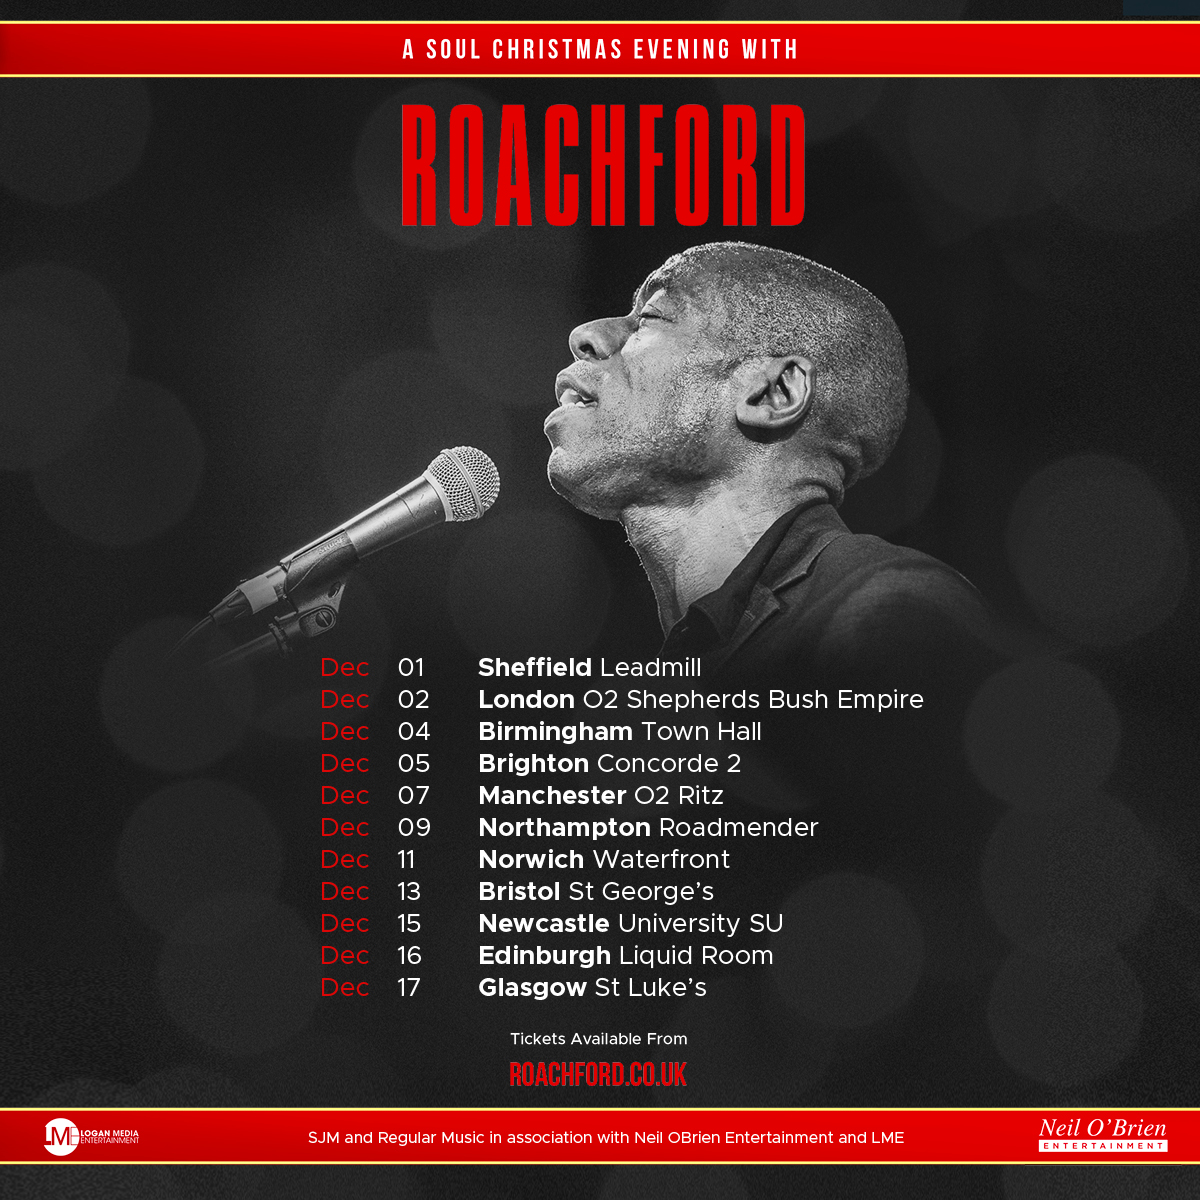 🎅🏼🎅🏼 Just Announced 🎅🏼🎅🏼 We are excited to announce that @roachfordmusic will be bringing his Soul Christmas Evening to Concorde 2 this December. Tickets go on-sale 10am this Friday!